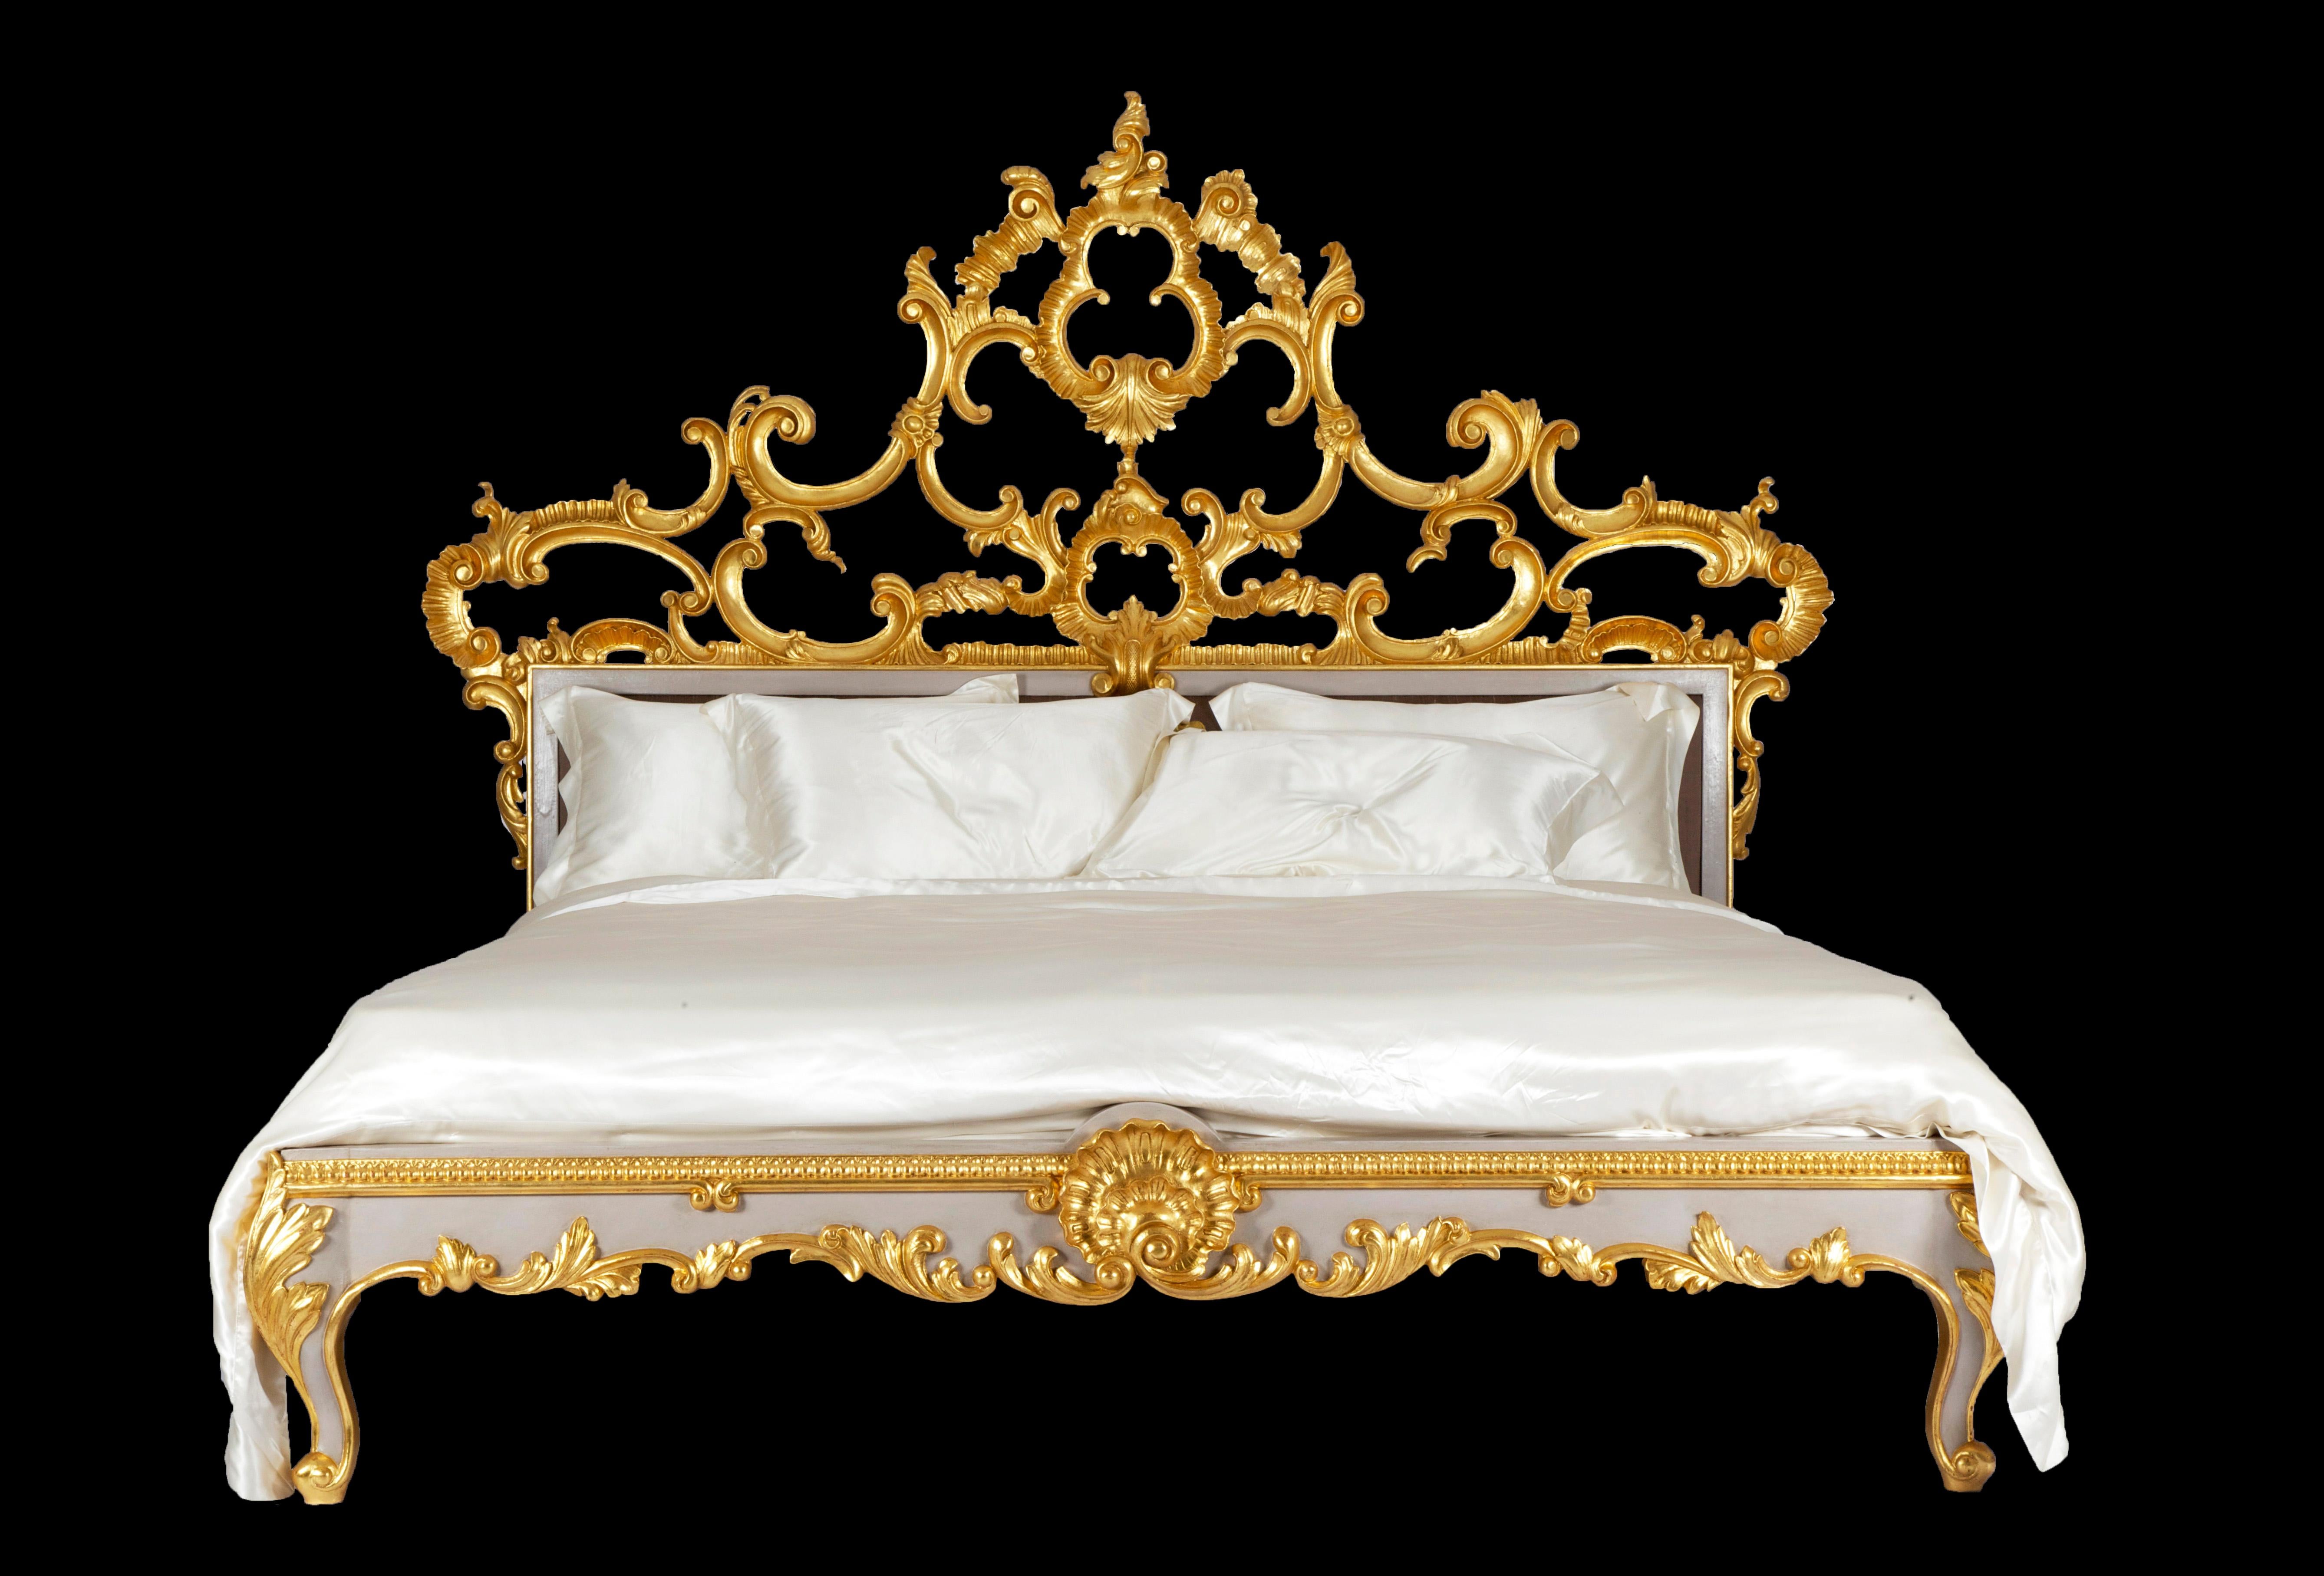 Giltwood Venetian Bed, Rococo Style, Hand Crafted, Made by La Maison London For Sale